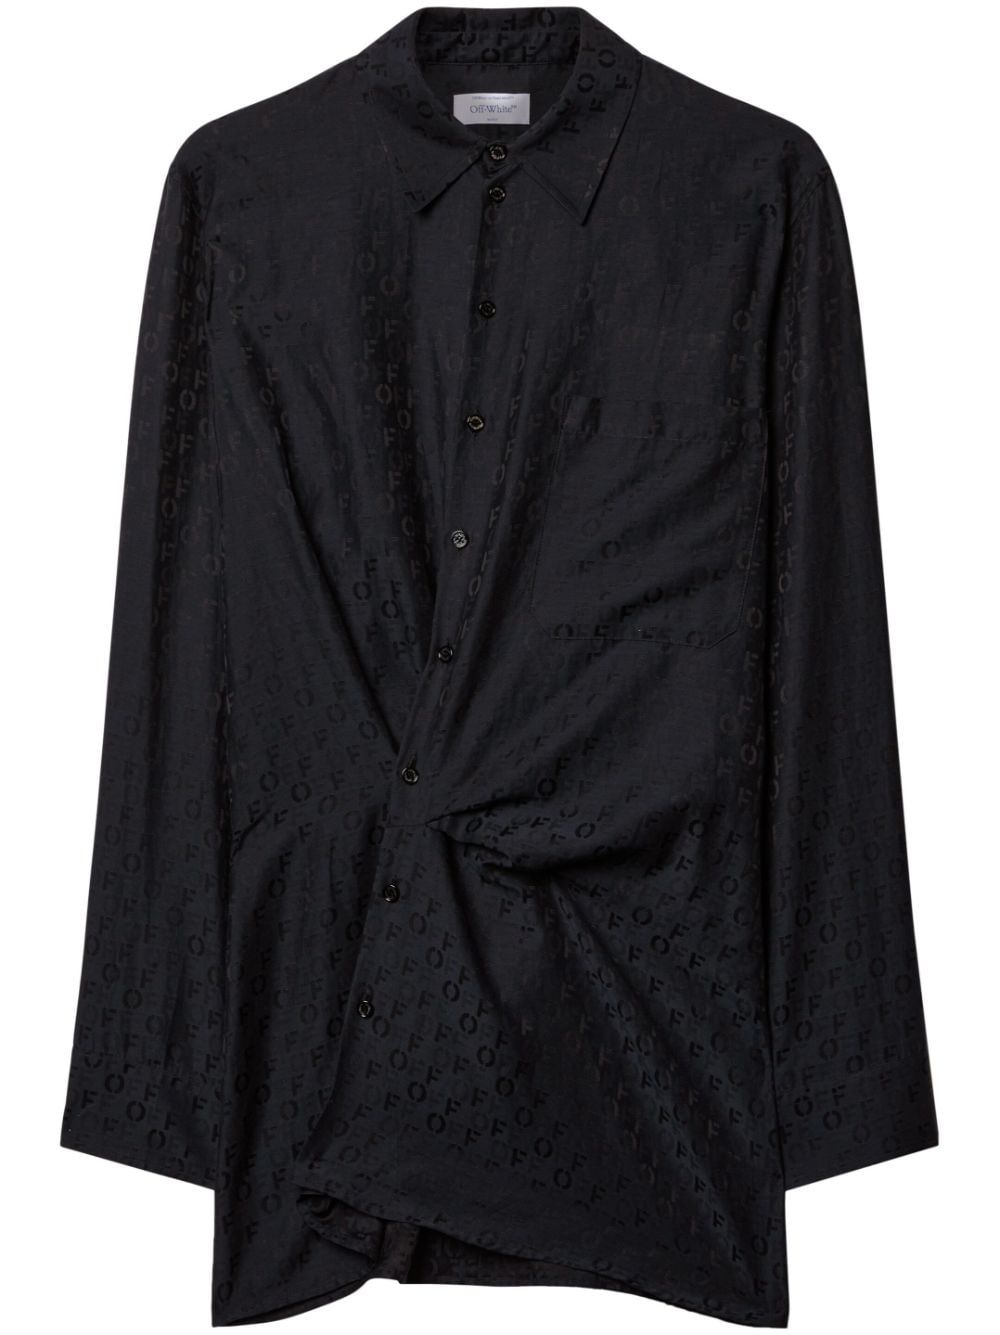 OFF-WHITE Black Jacquard Shirt Dress with Off Motif and Asymmetric Button Closure